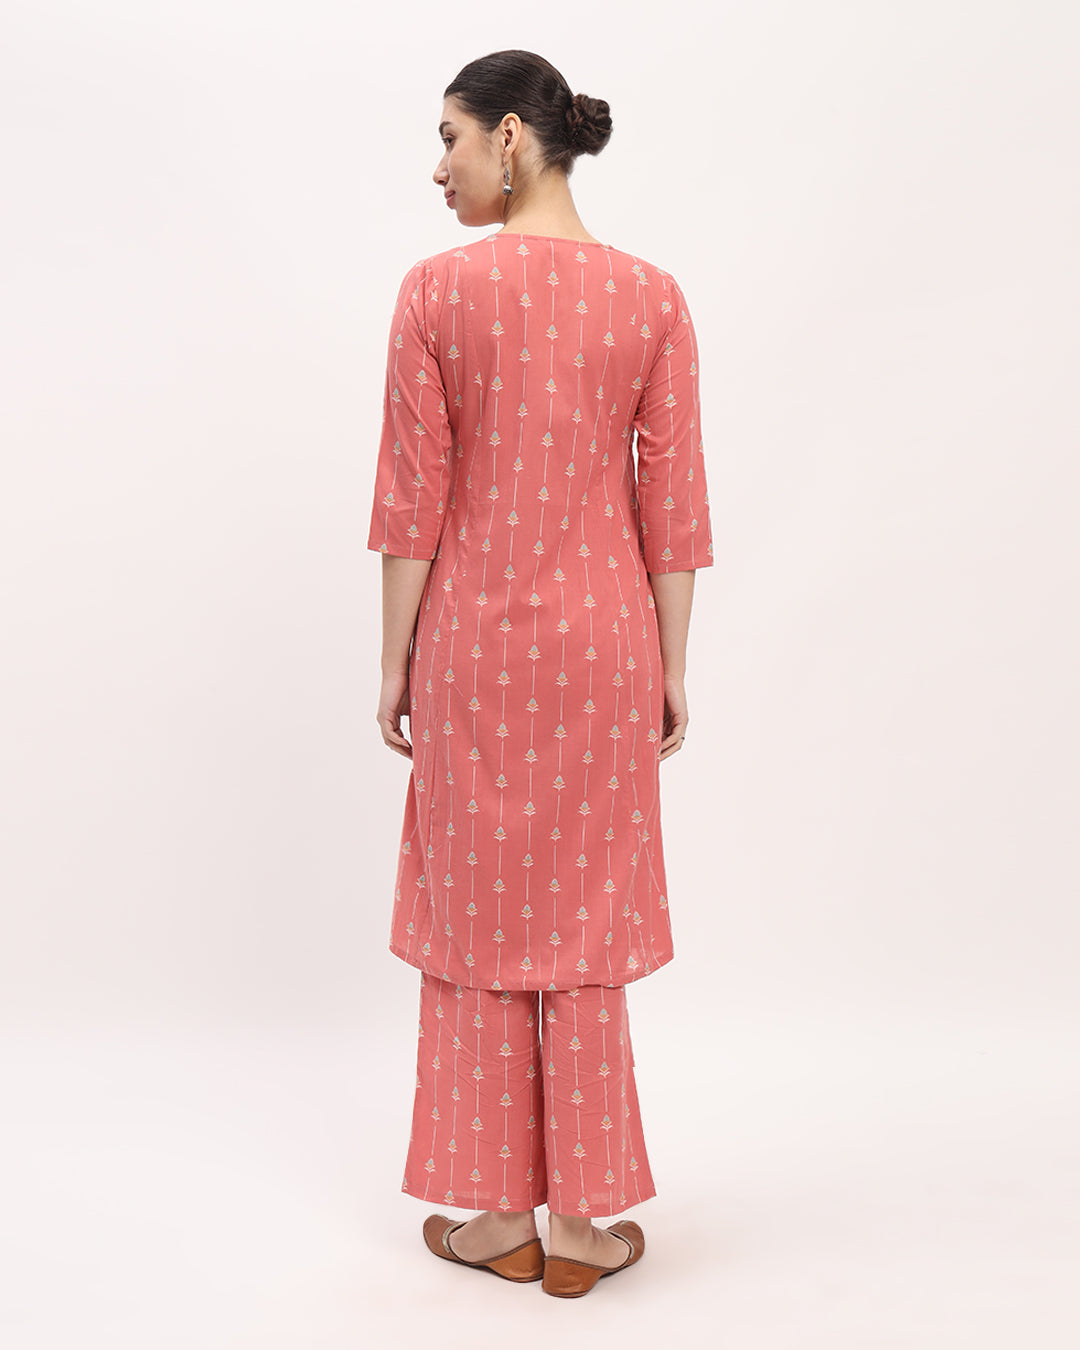 Combo: English Floral Garden & Blue Starry Tropical Angrakha Printed Kurta (Without Bottoms)